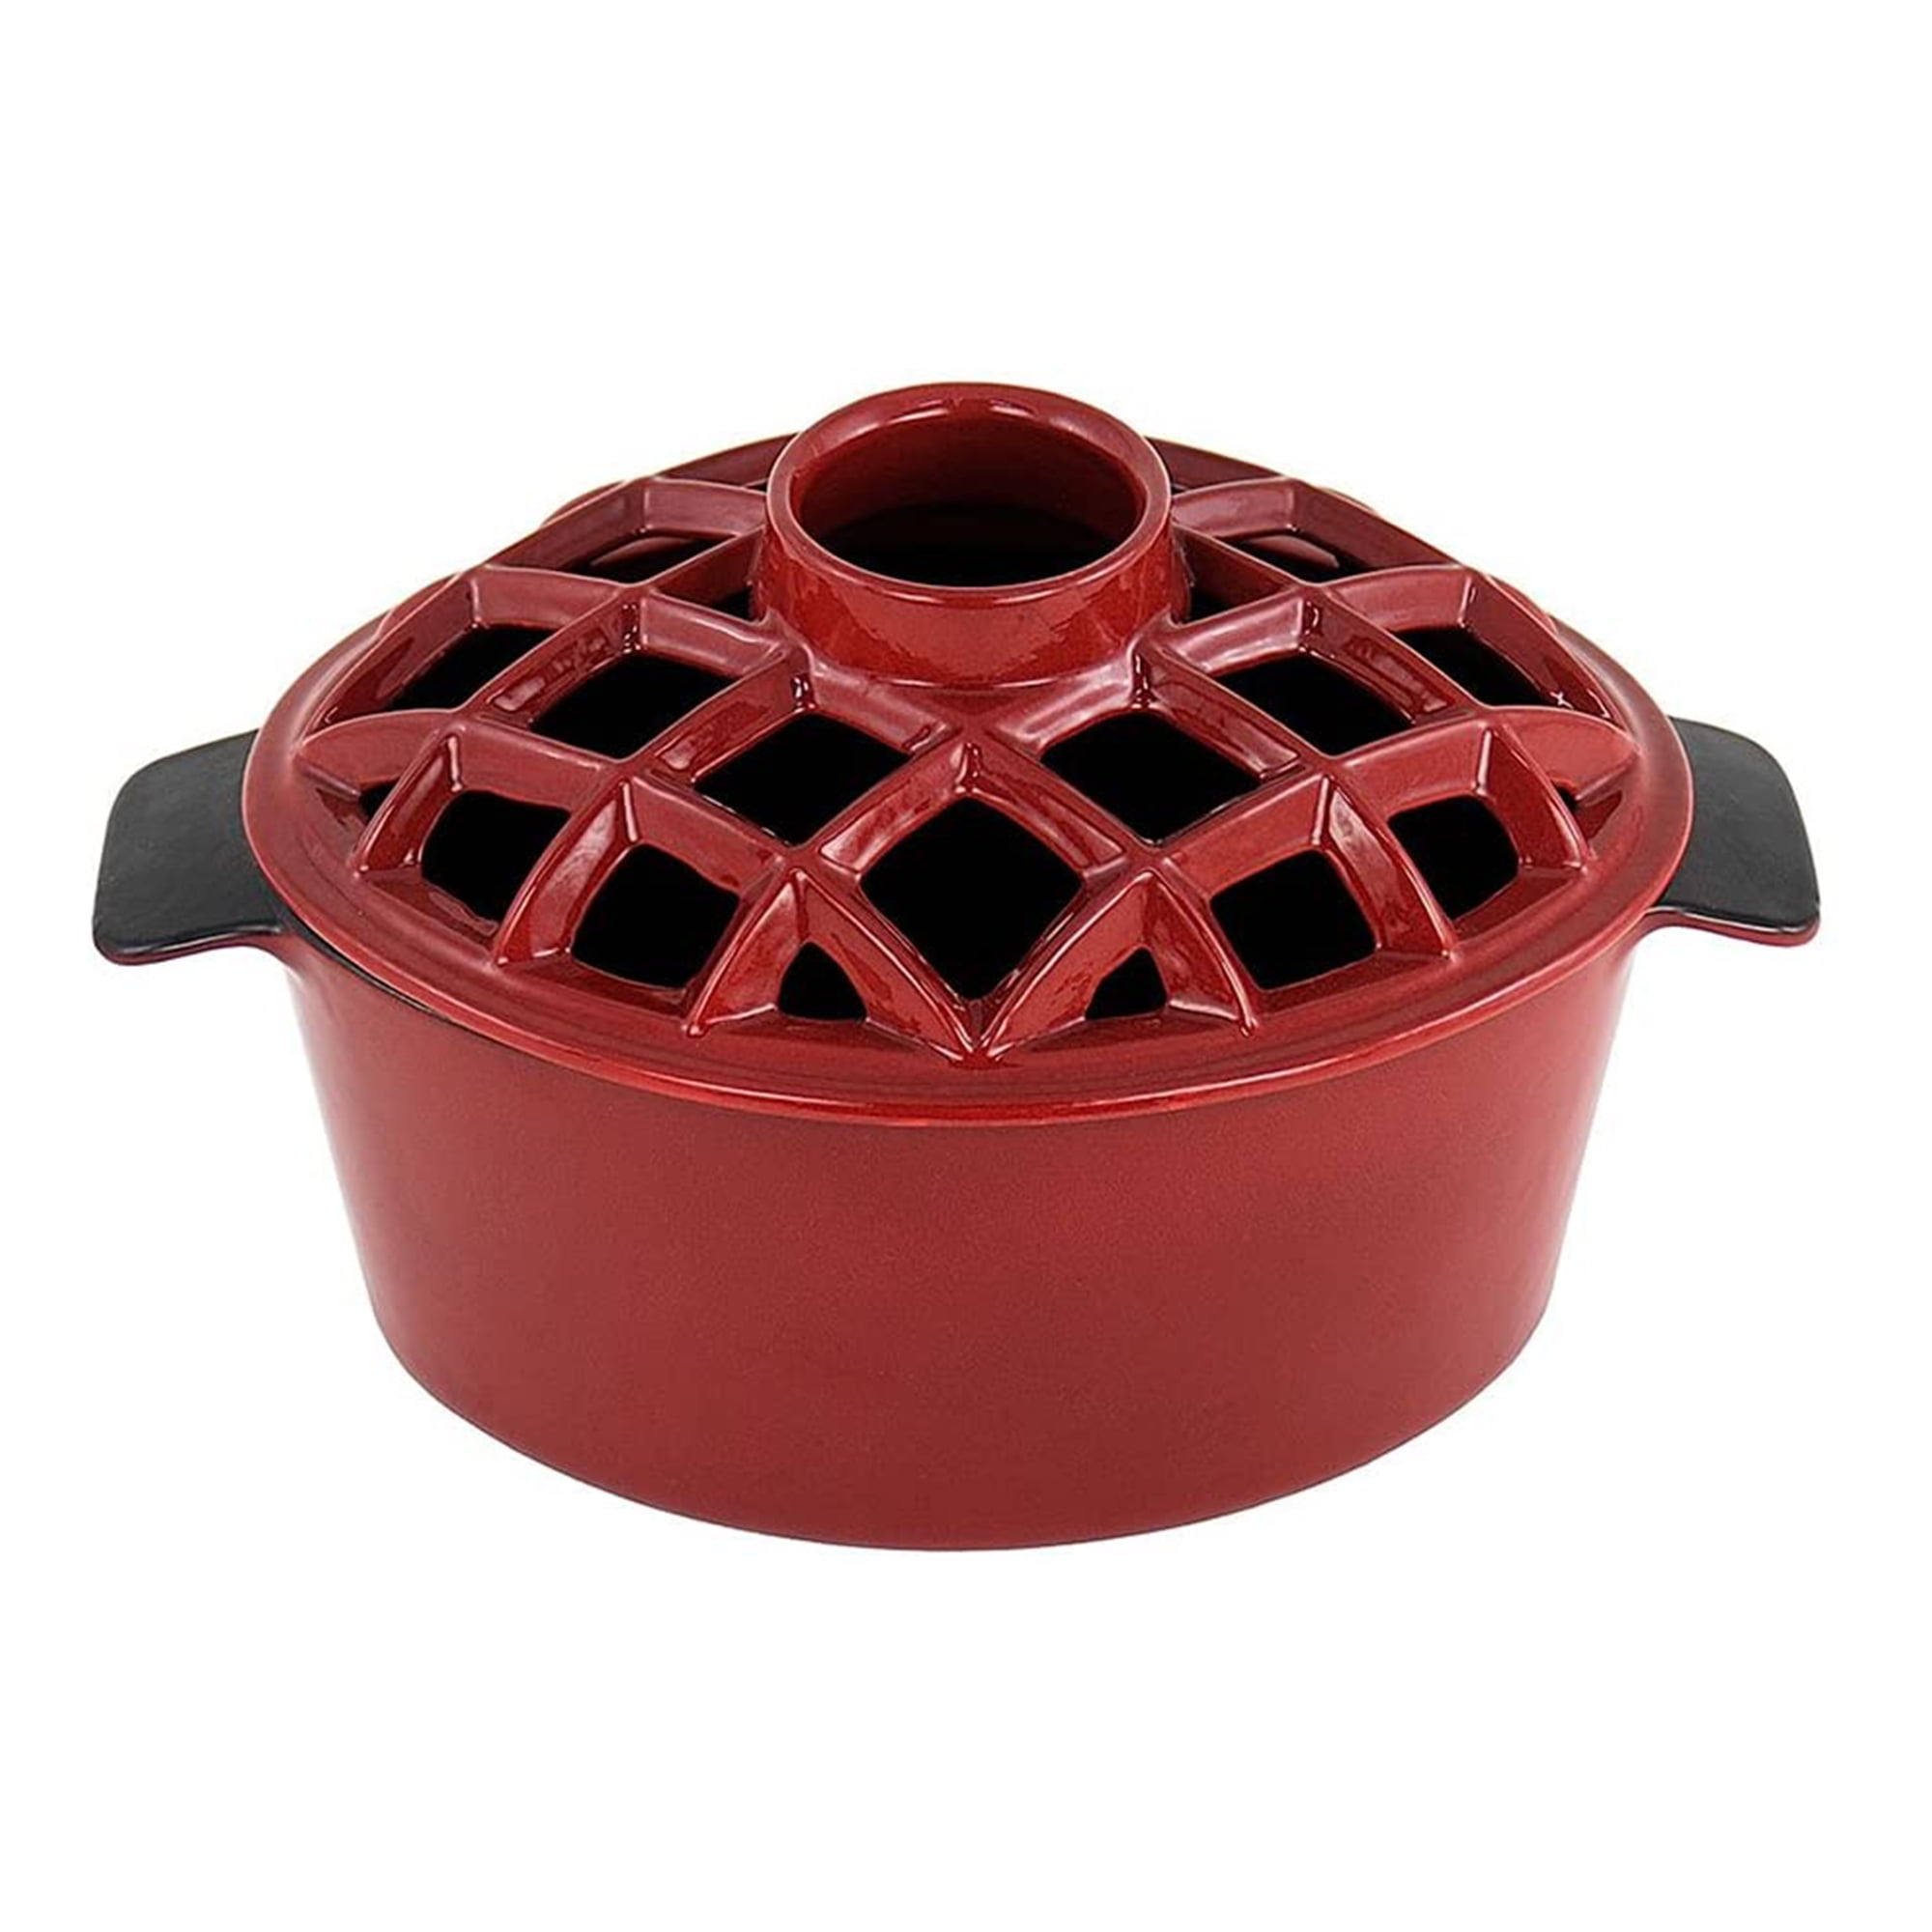 UNITED STATES STOVE COMPANY 1 Qt. Red Lattice Steamer for Stoves